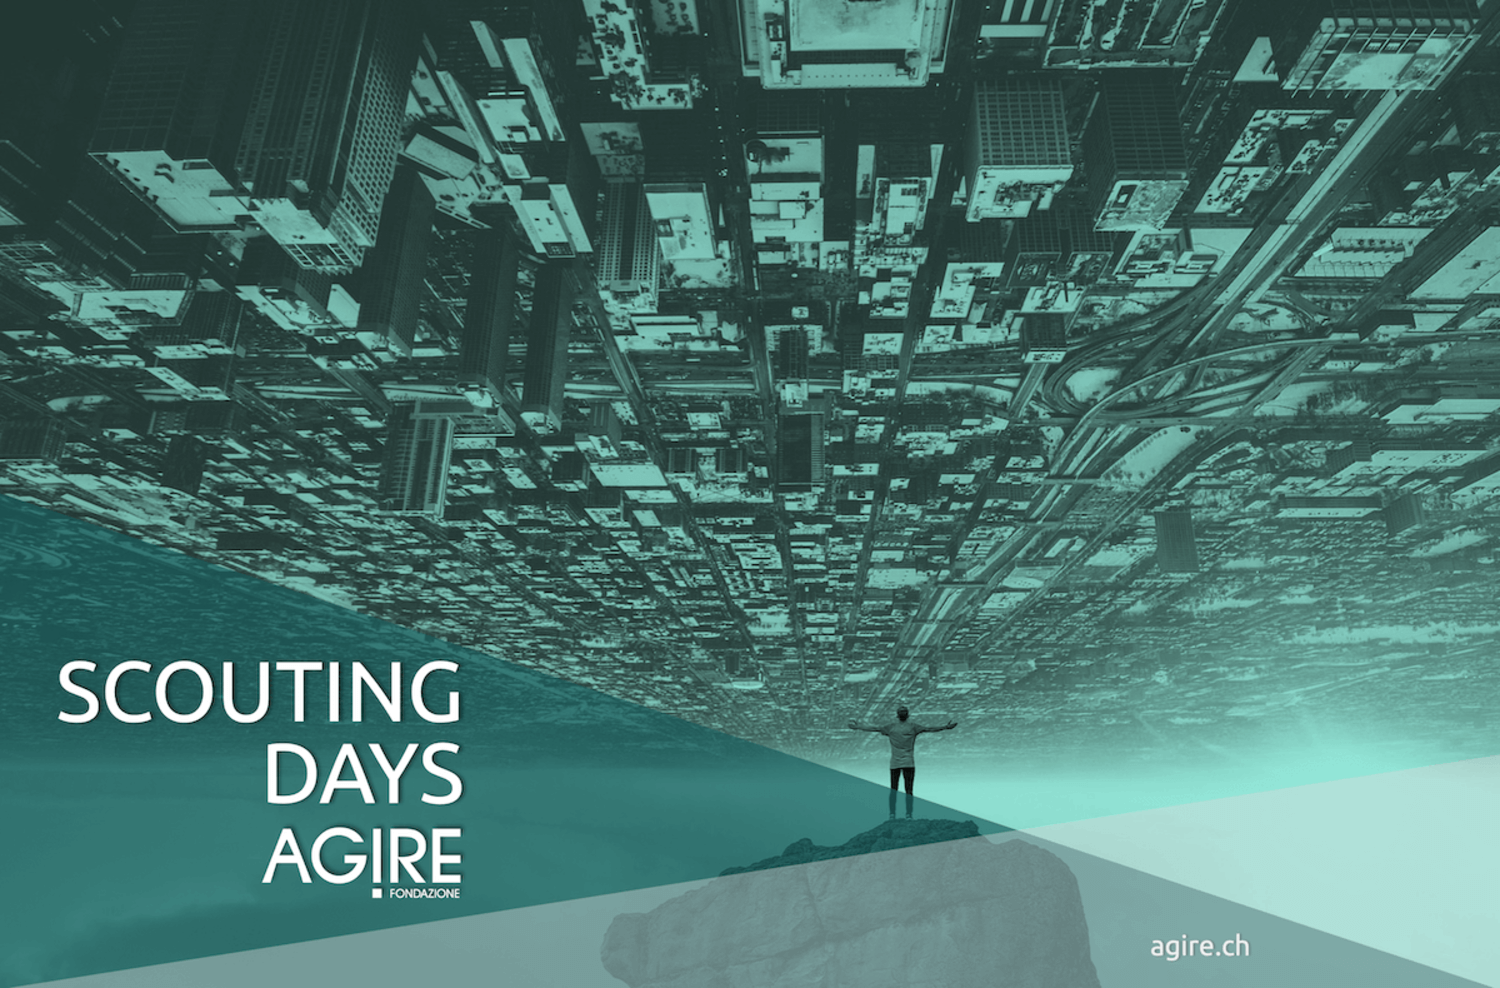 Scouting Days Agire: new service for companies and startups